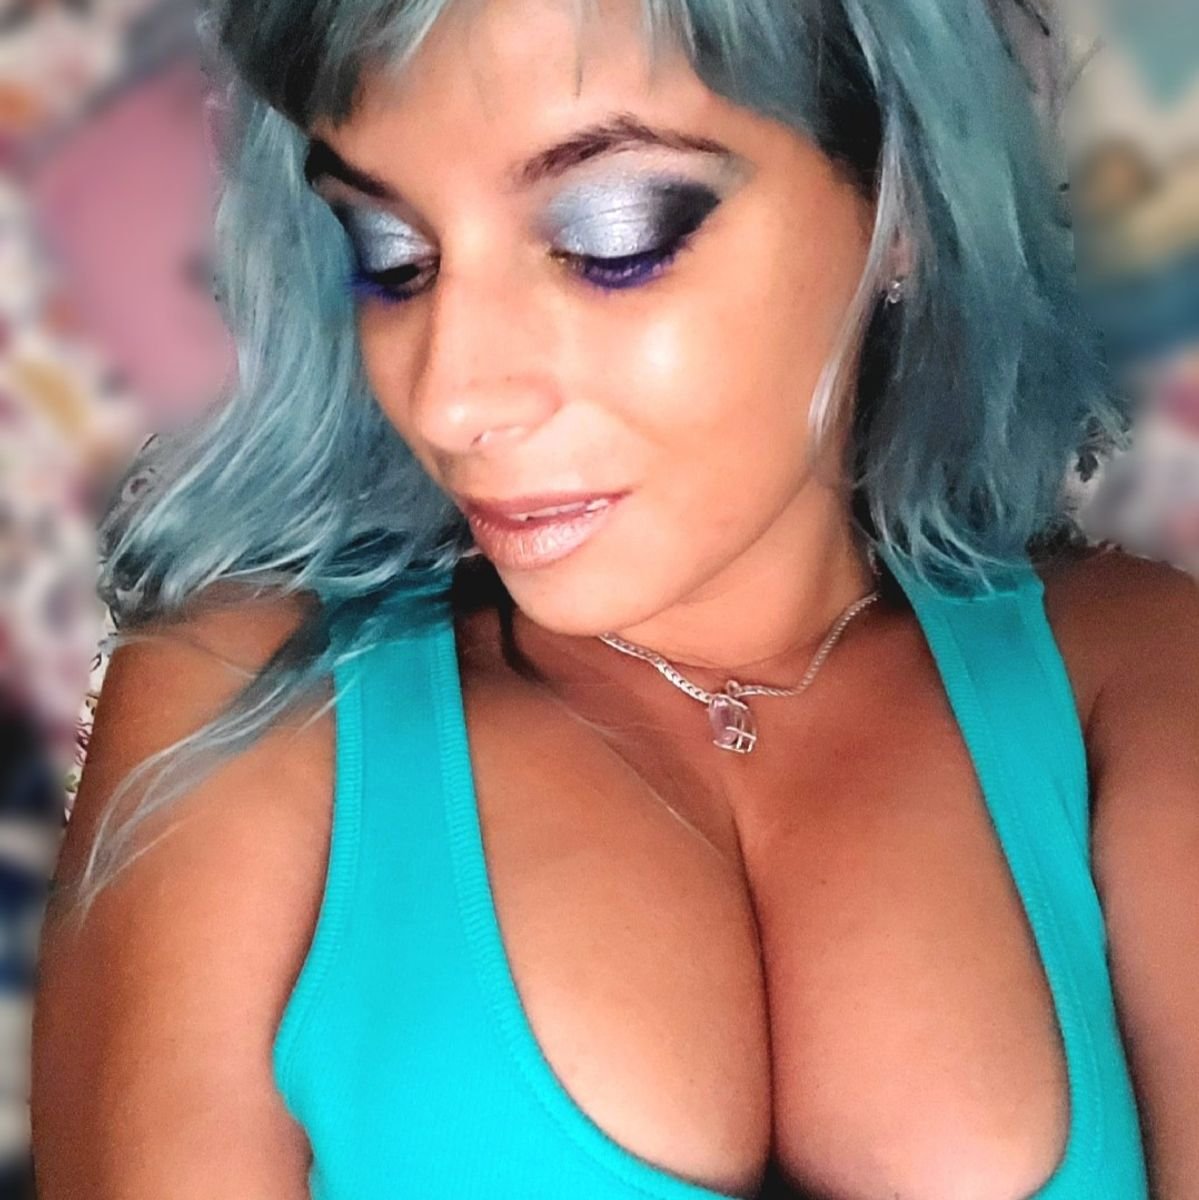 SkyPrivate live sex chat with XxX100ctDIAMOND